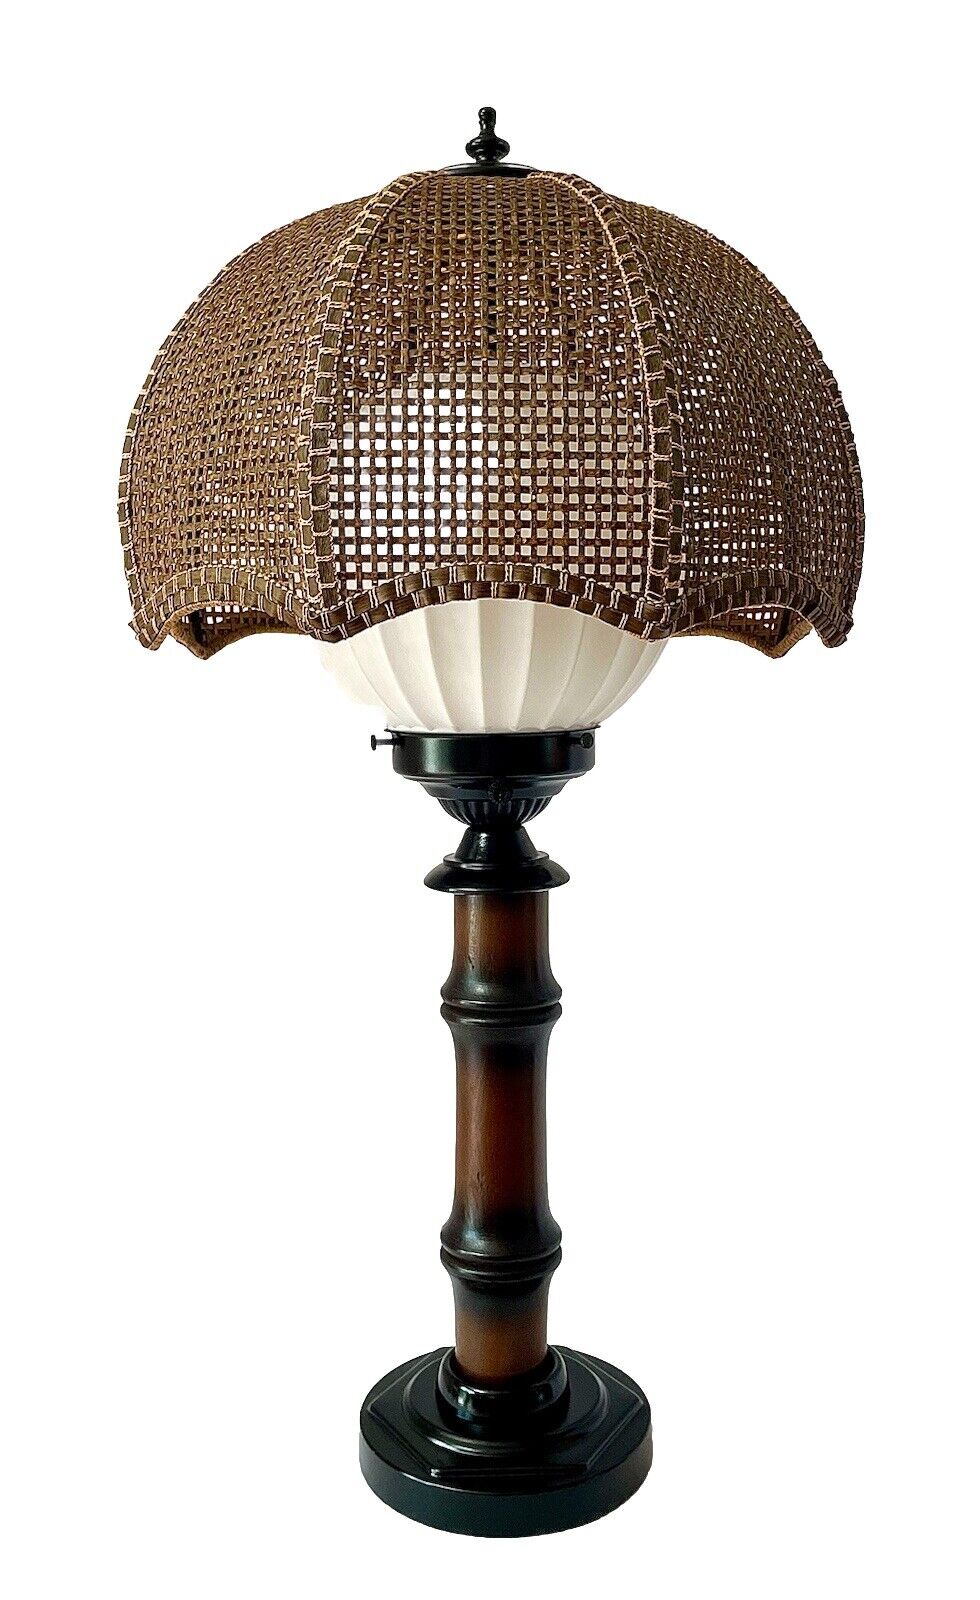 Vintage Tropical Faux Bamboo Wicker Shade Parlor Table Lamp